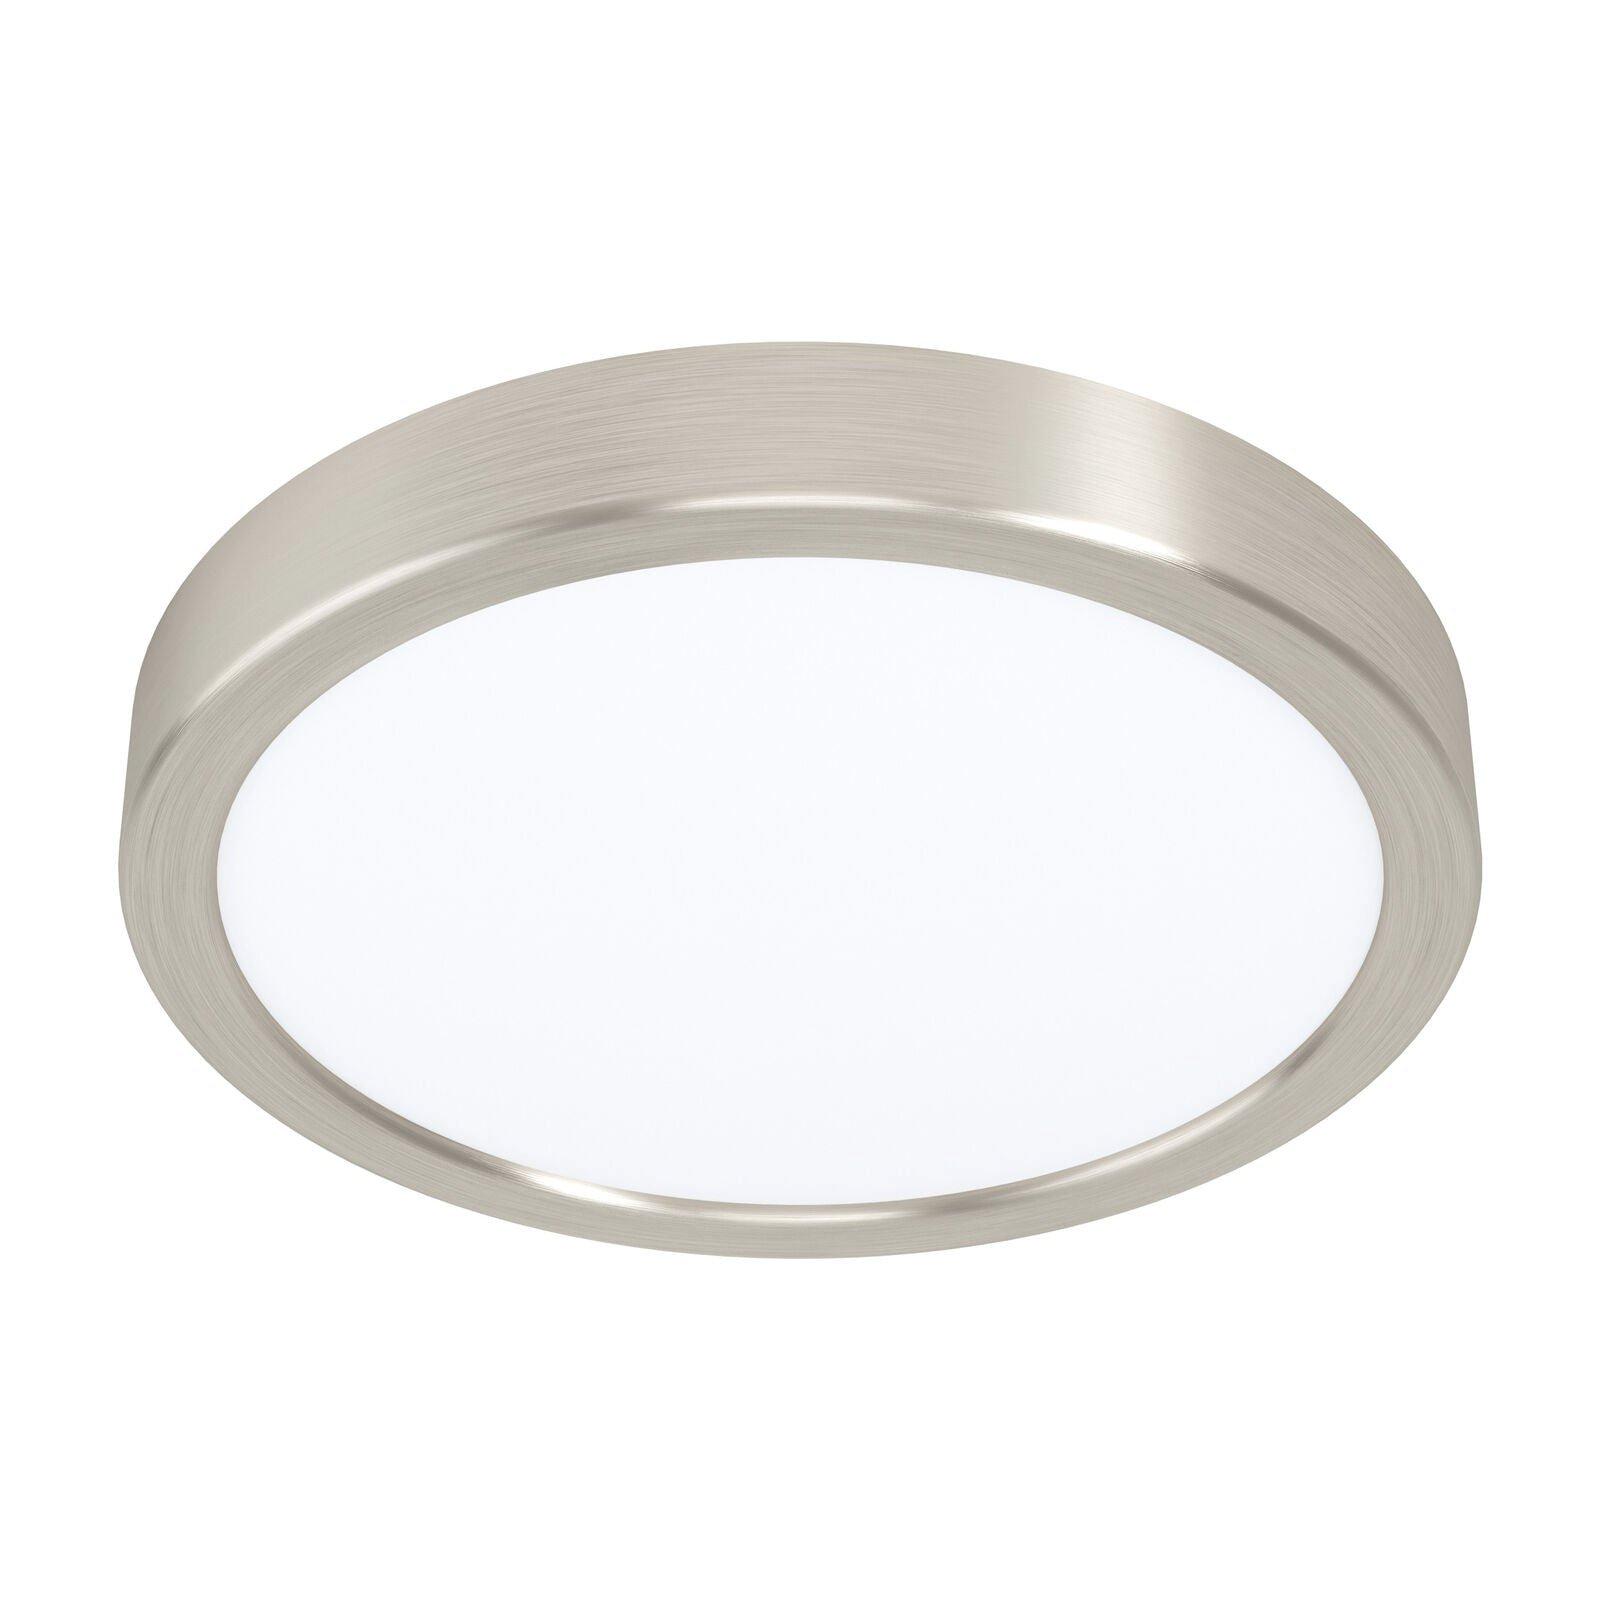 Wall / Ceiling Light Satin Nickel 210mm Round Surface Mounted 16.5W LED 4000K